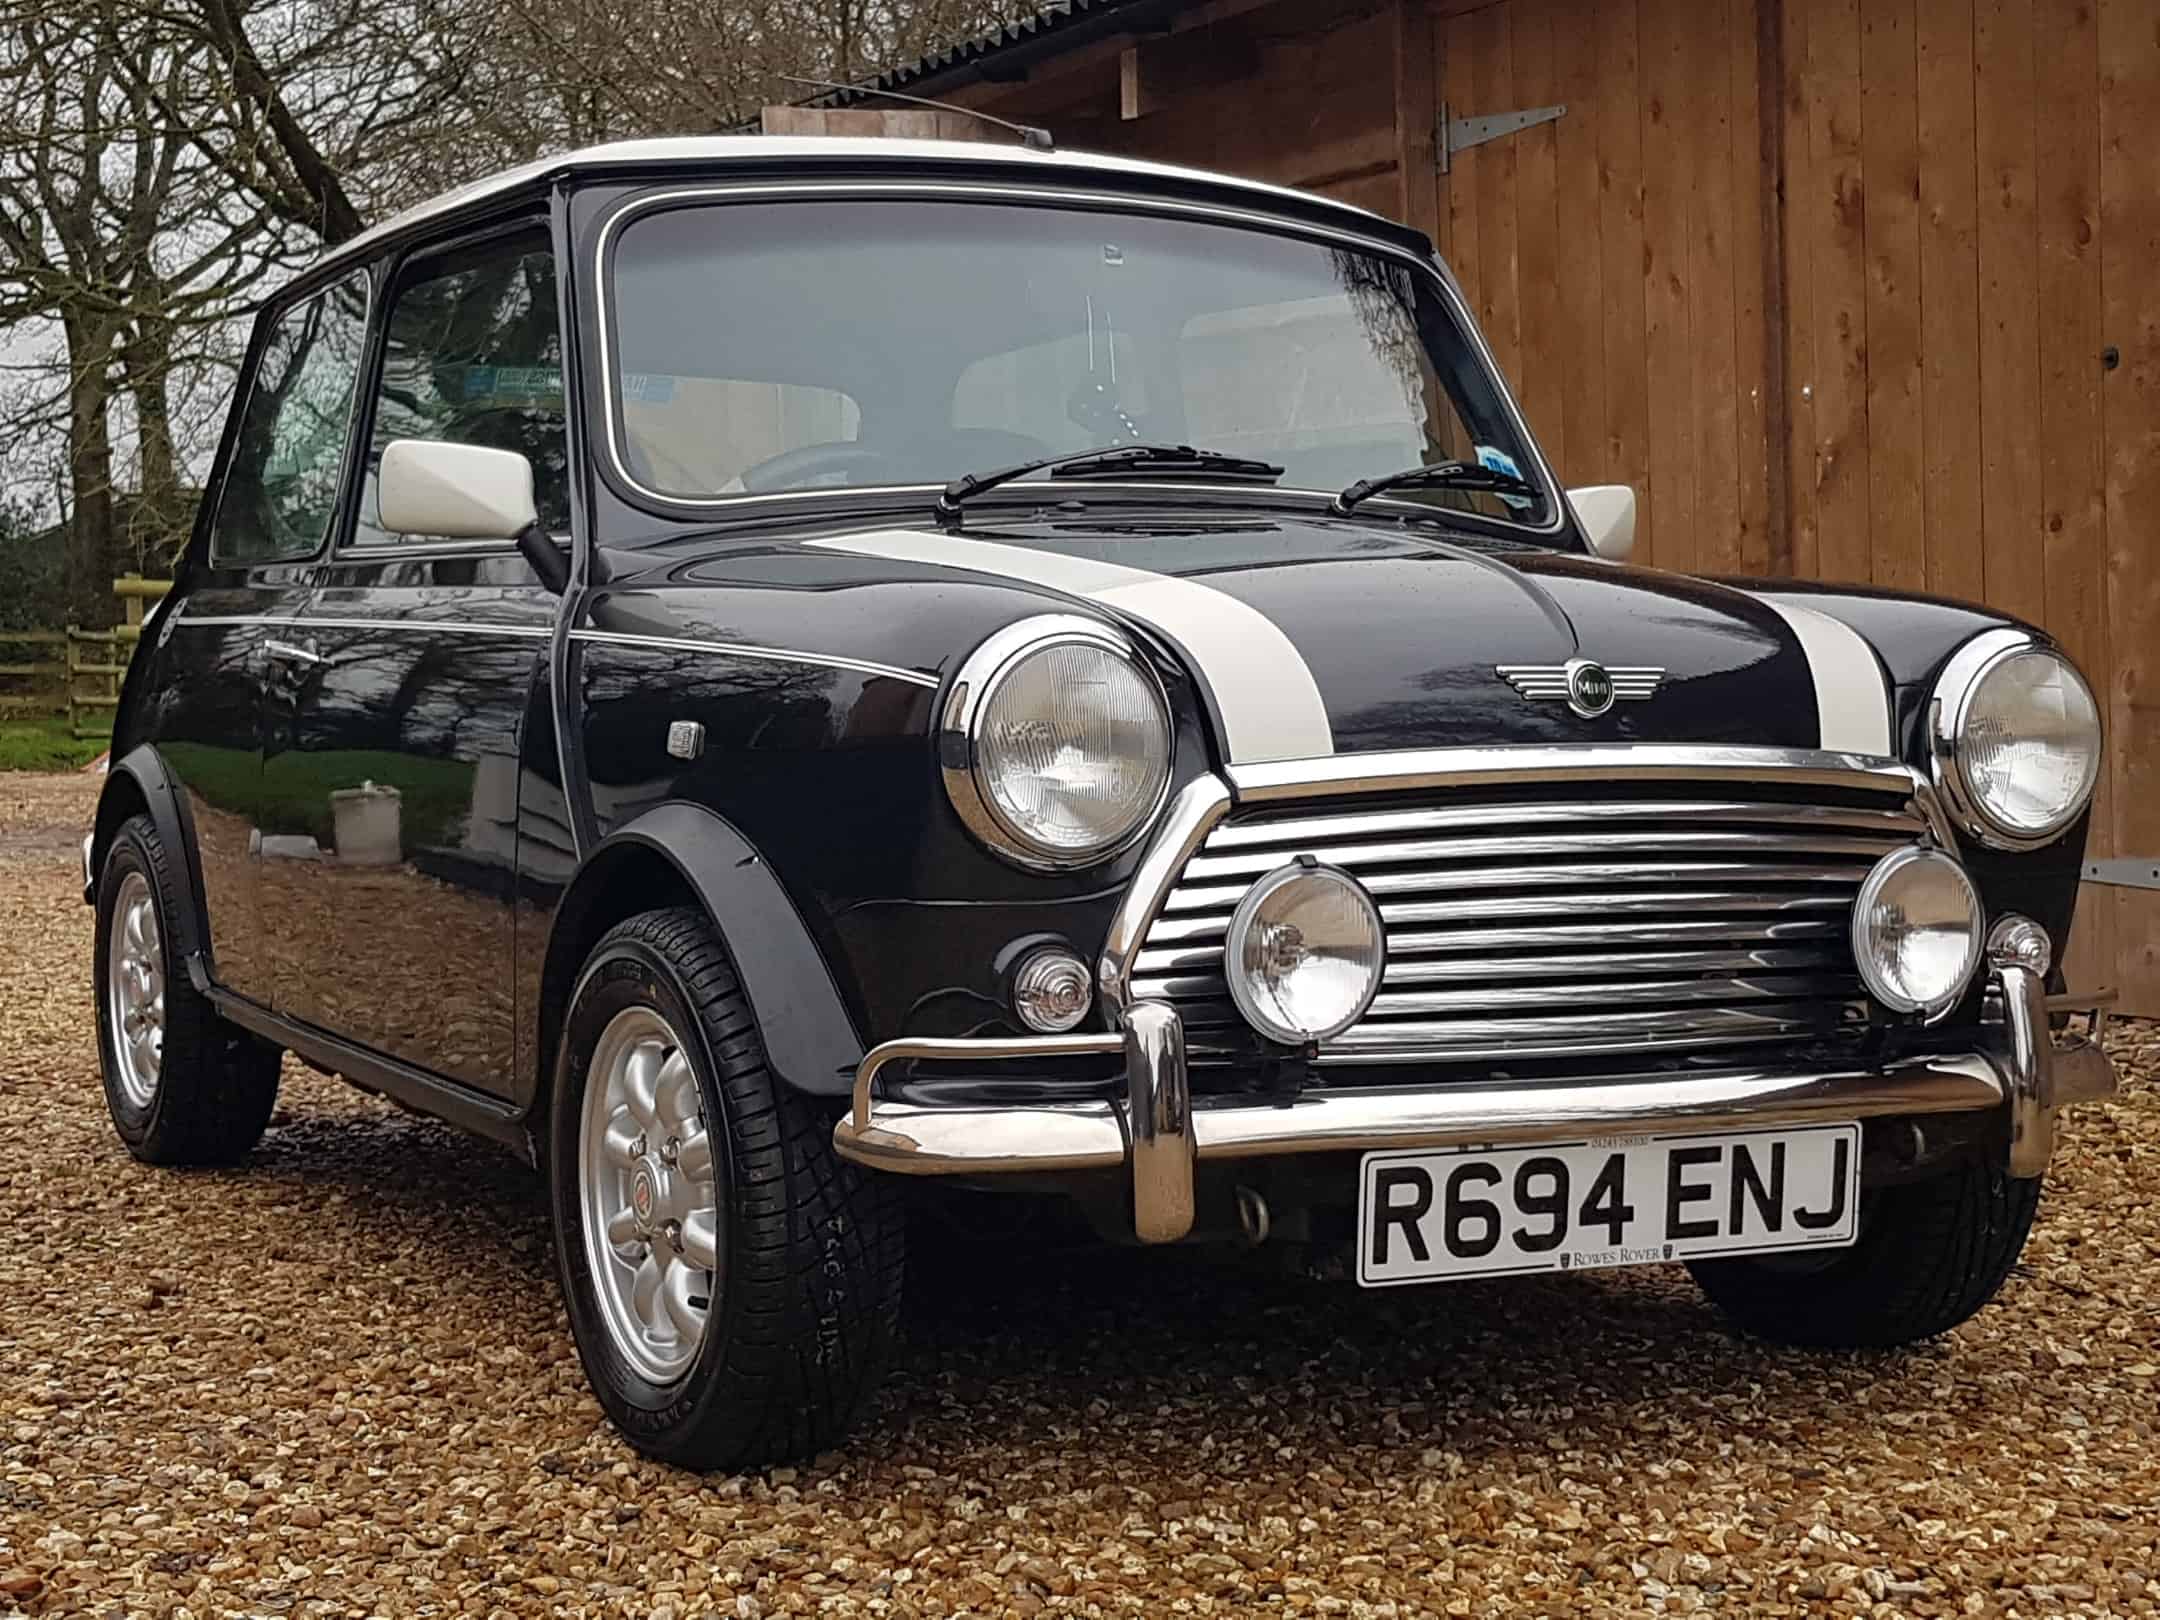 ** NOW SOLD ** 1997 Mini Cooper in rare Graphite Metallic on just 7600 miles from new!